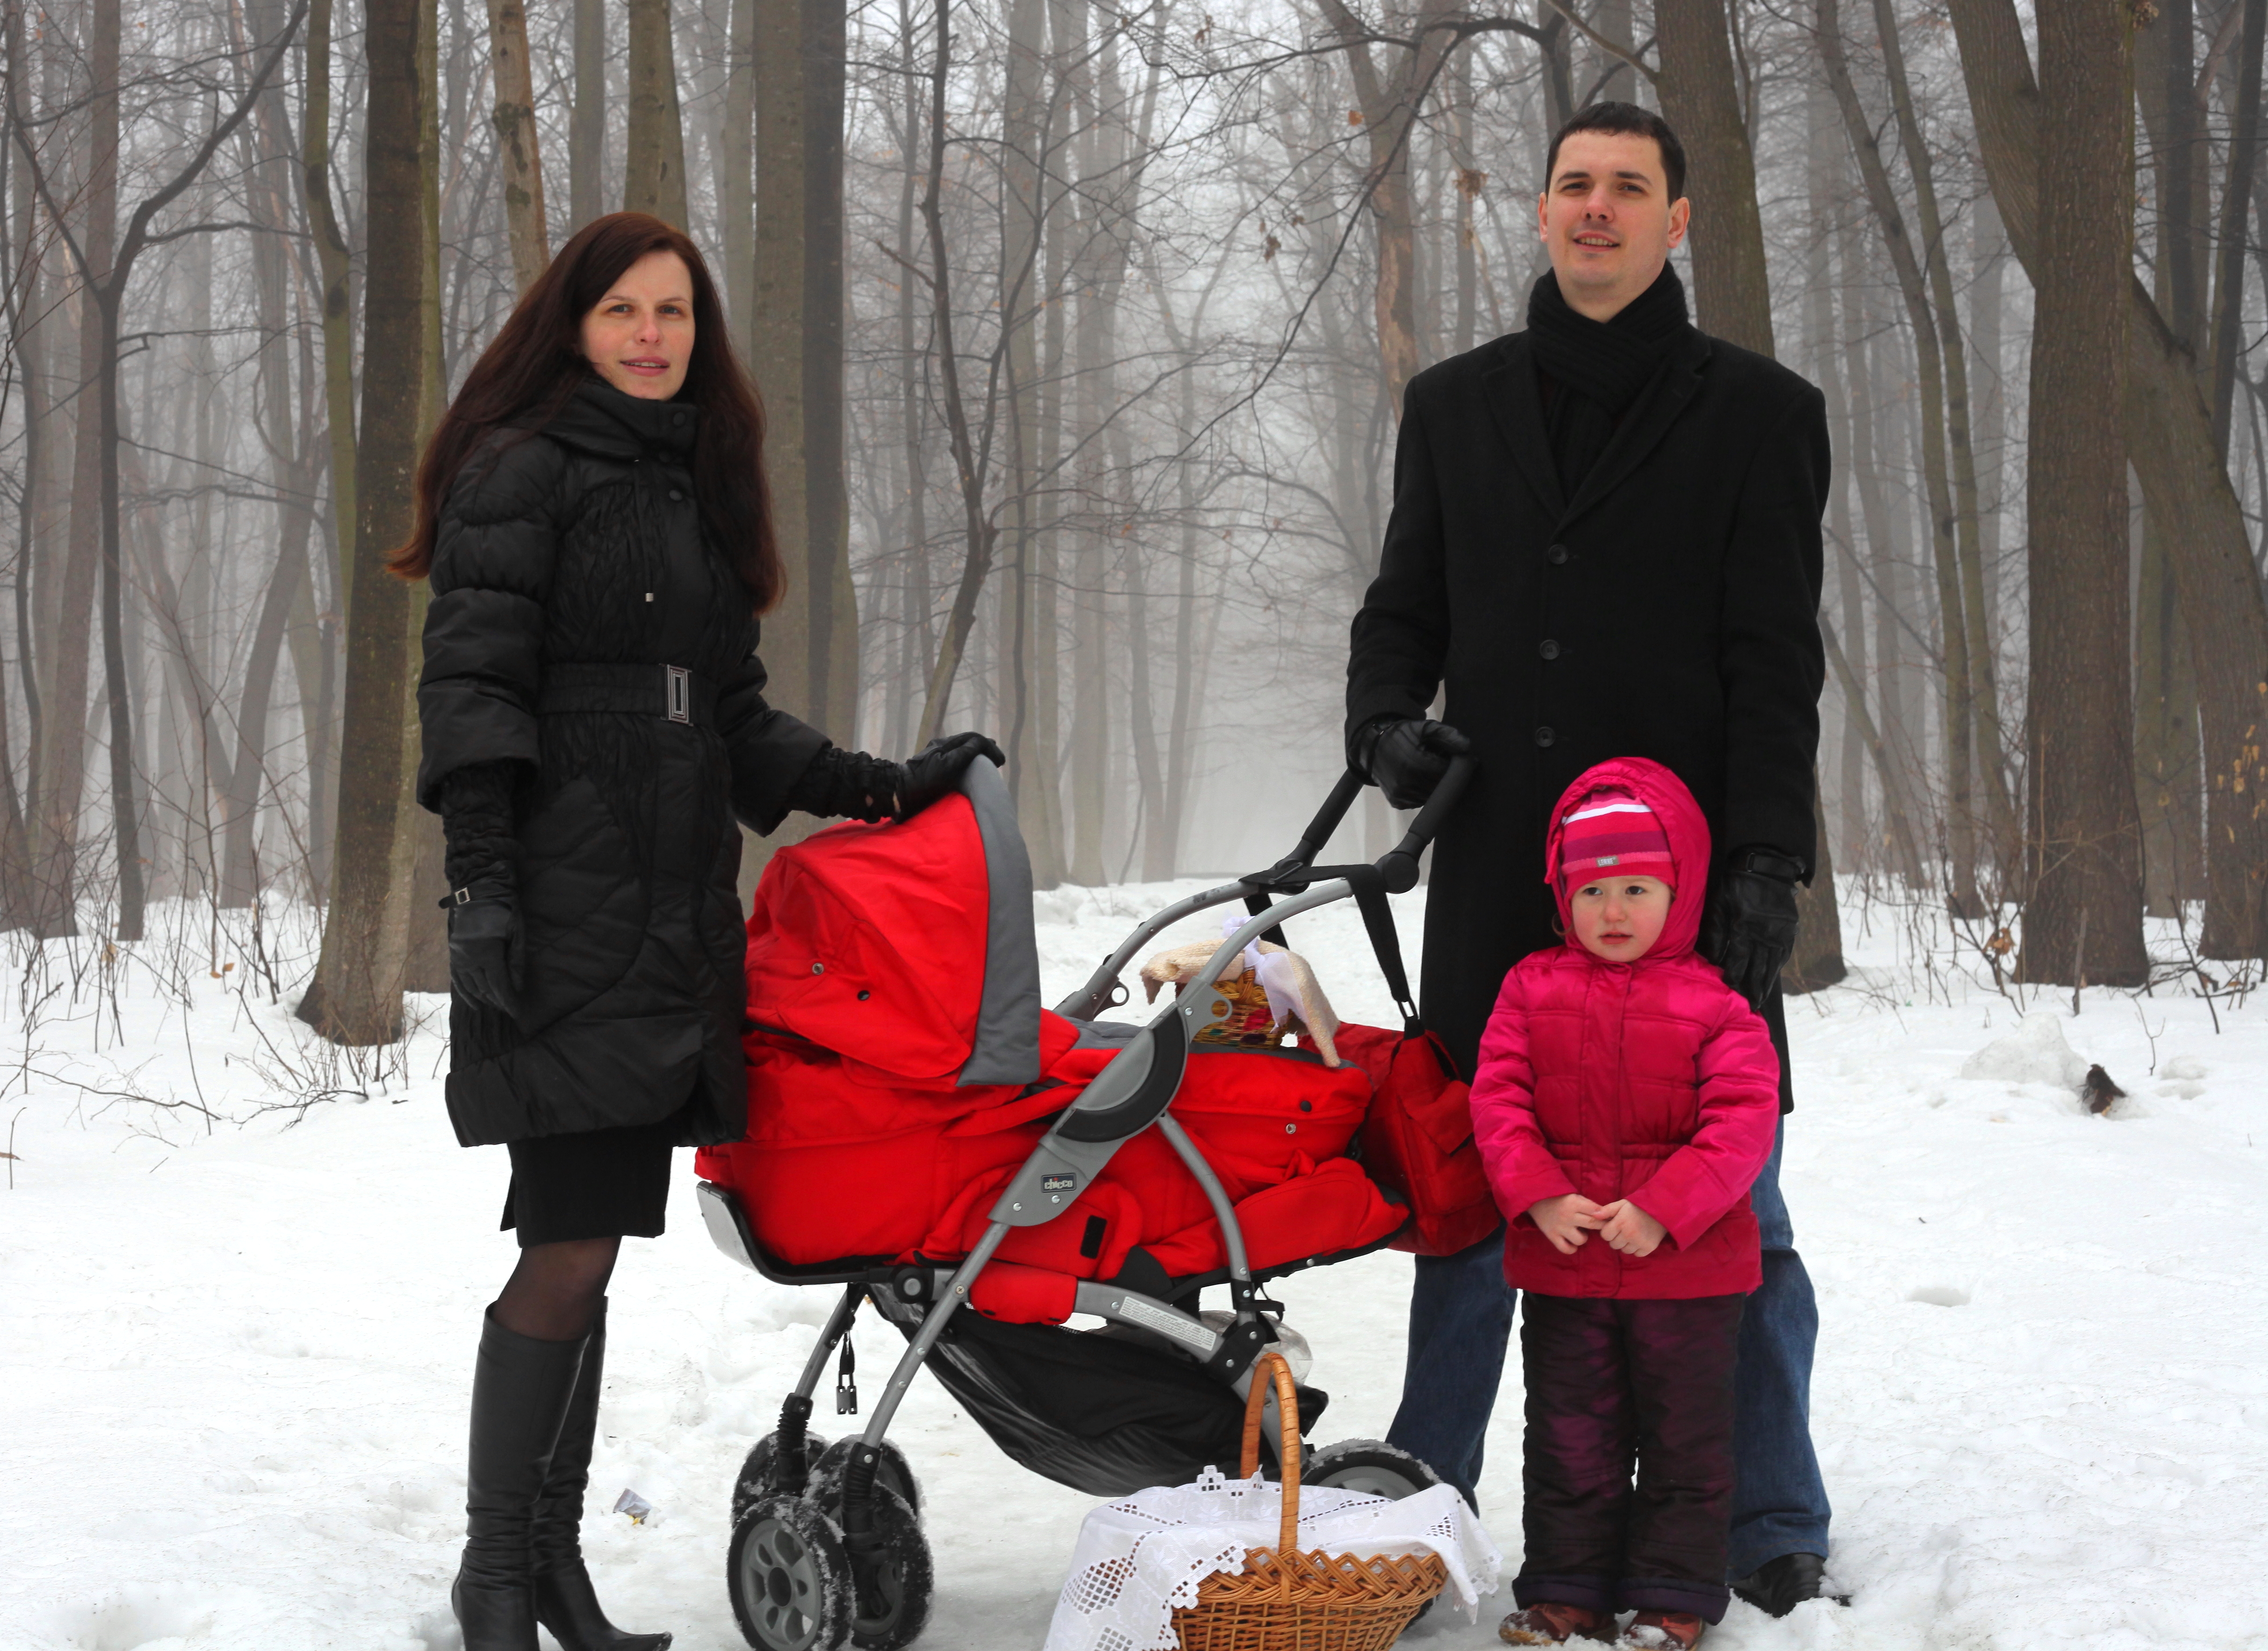 a beautiful Catholic family in a foggy and snowy forest